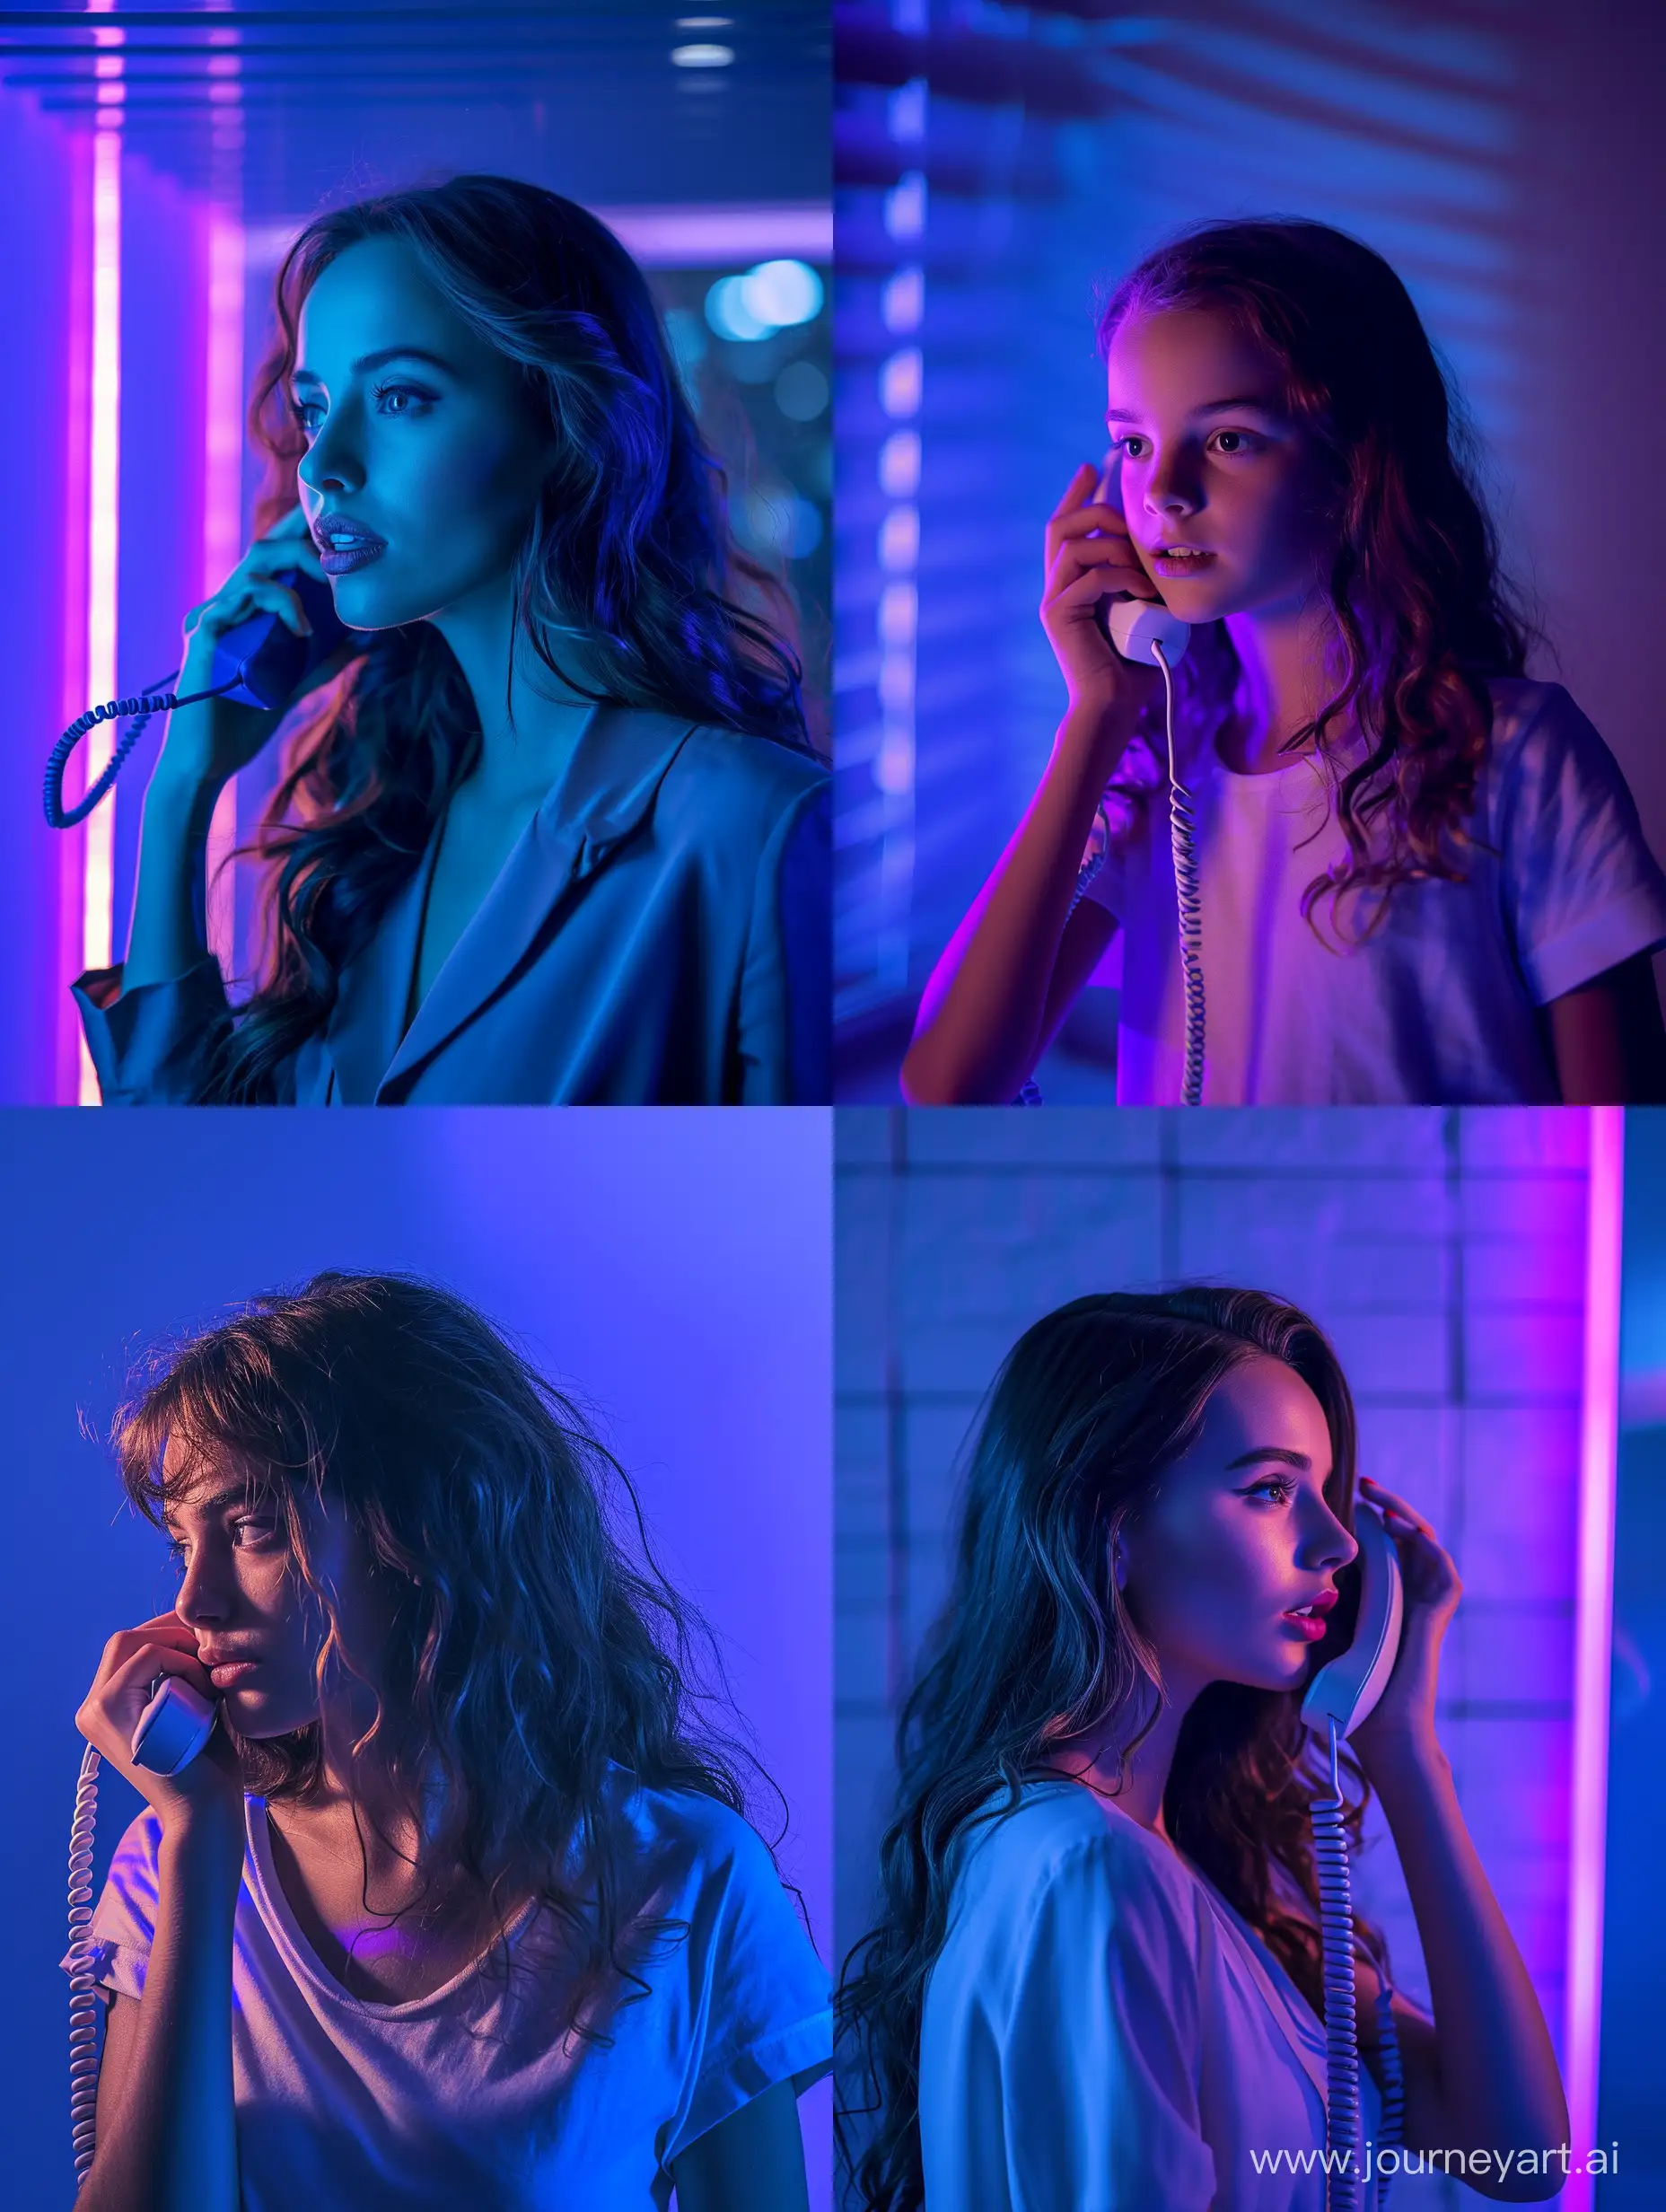 A beautiful girl chatting on the phone, blue and purple background, cinematic, real, resolution, high quality